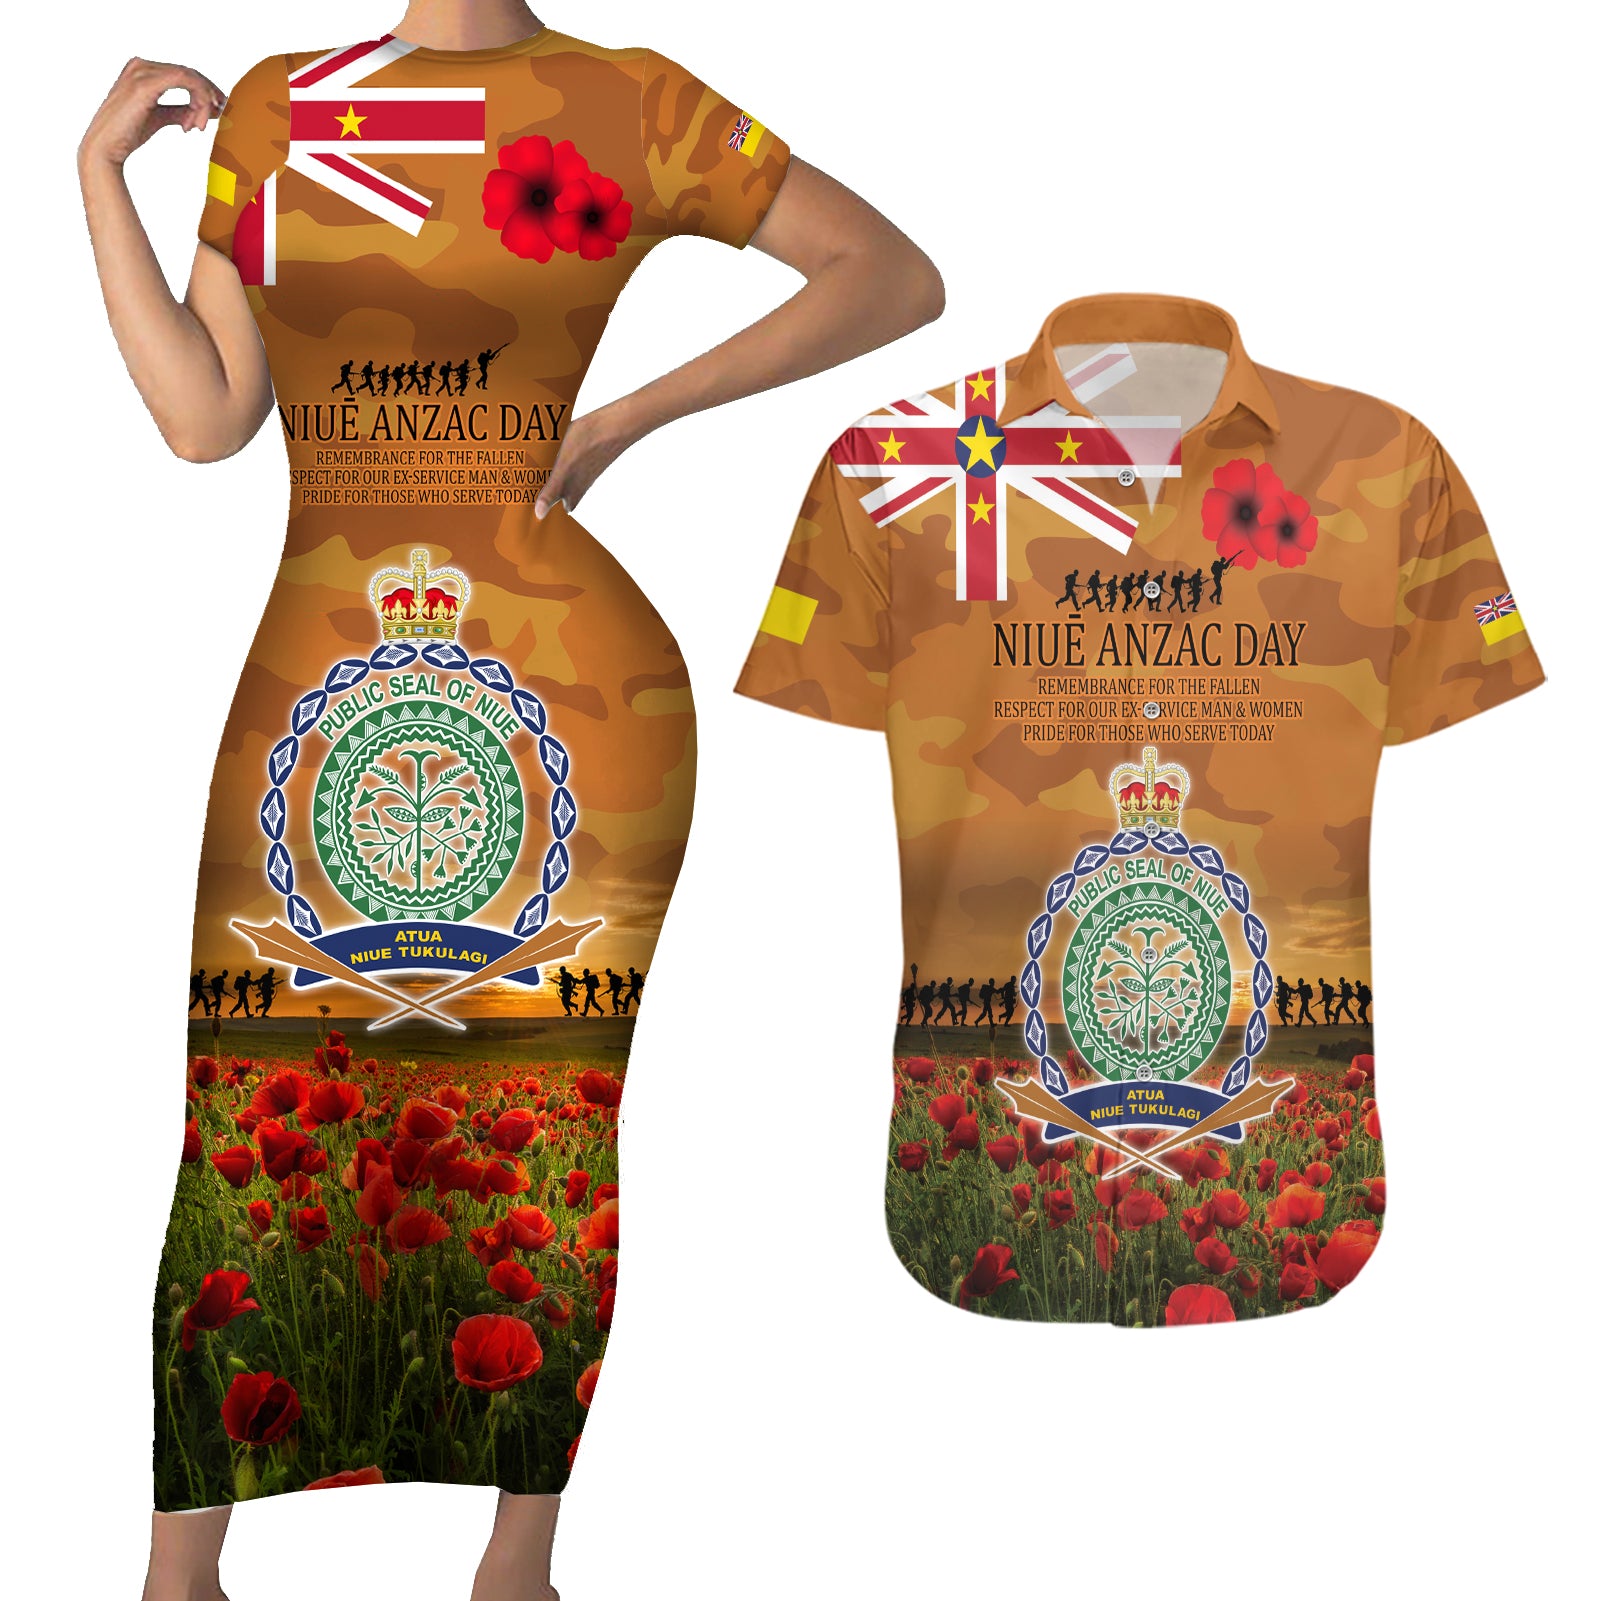 Niue ANZAC Day Personalised Couples Matching Short Sleeve Bodycon Dress and Hawaiian Shirt with Poppy Field LT9 Art - Polynesian Pride